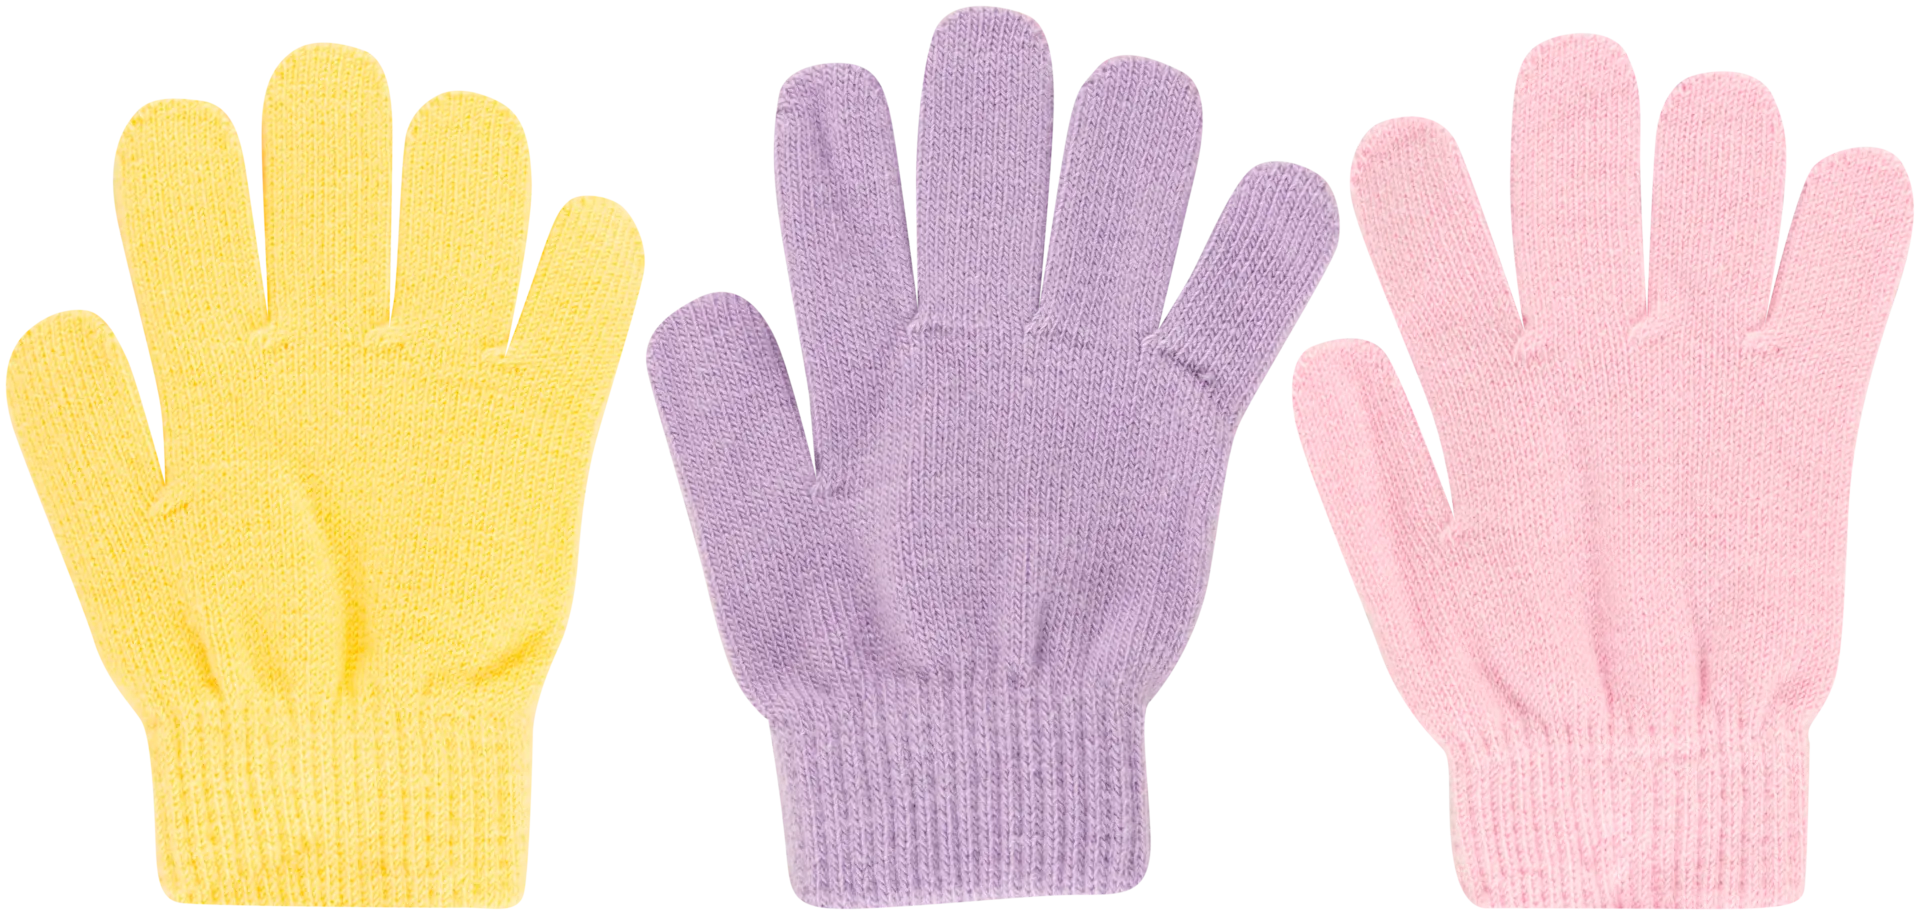 Lasten stretch-sormikkaat 3-pack 237C082410 - Lilac/yellow/pink - 1